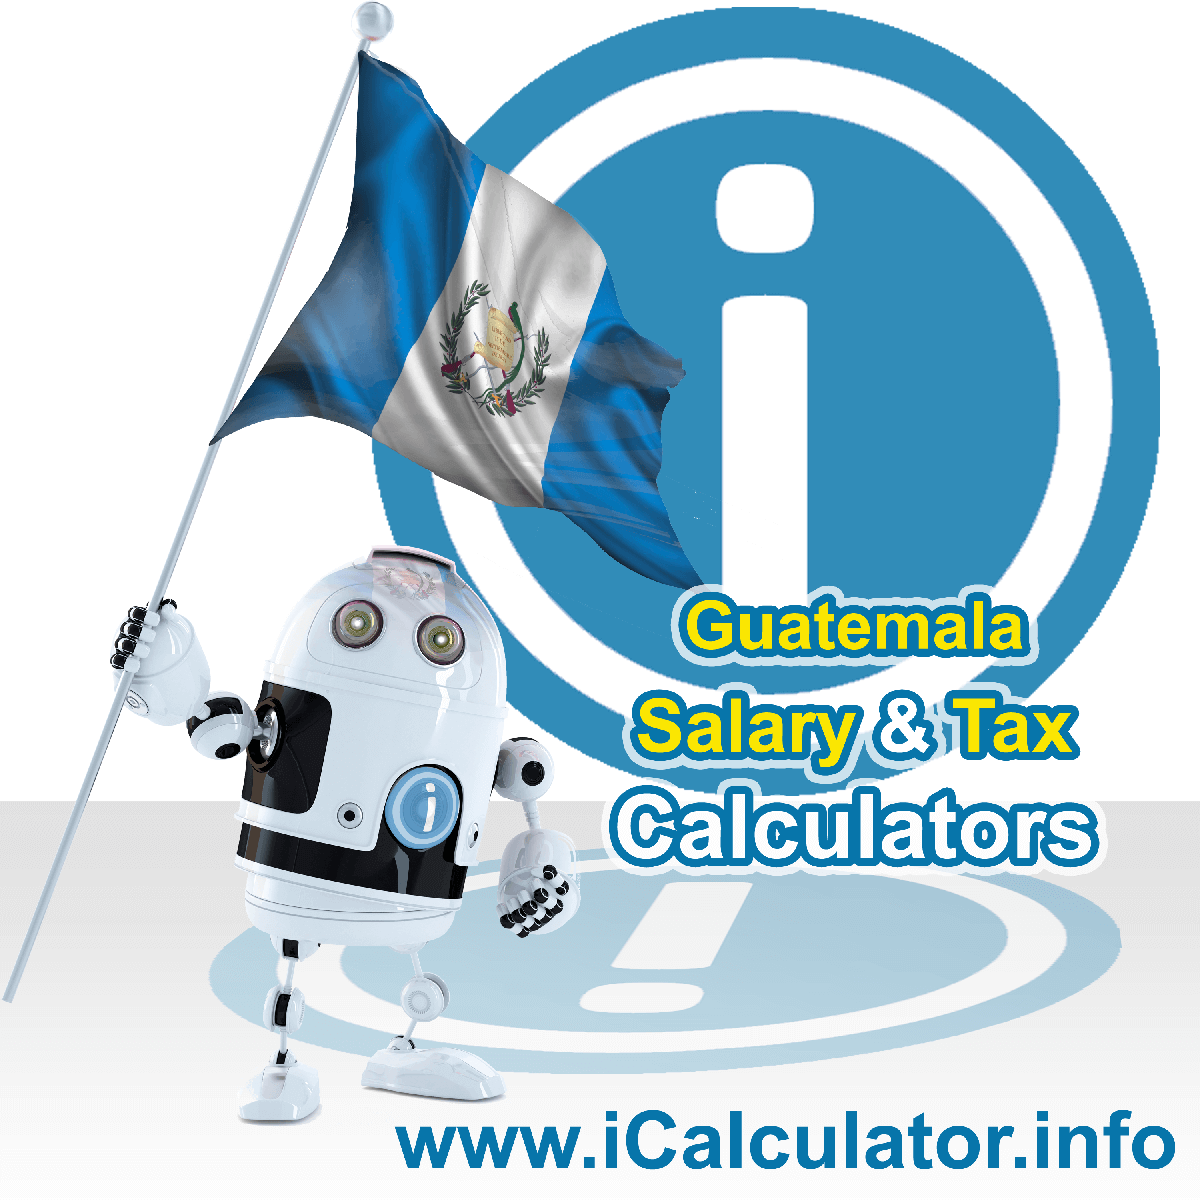 Guatemala Wage Calculator. This image shows the Guatemala flag and information relating to the tax formula for the Guatemala Tax Calculator